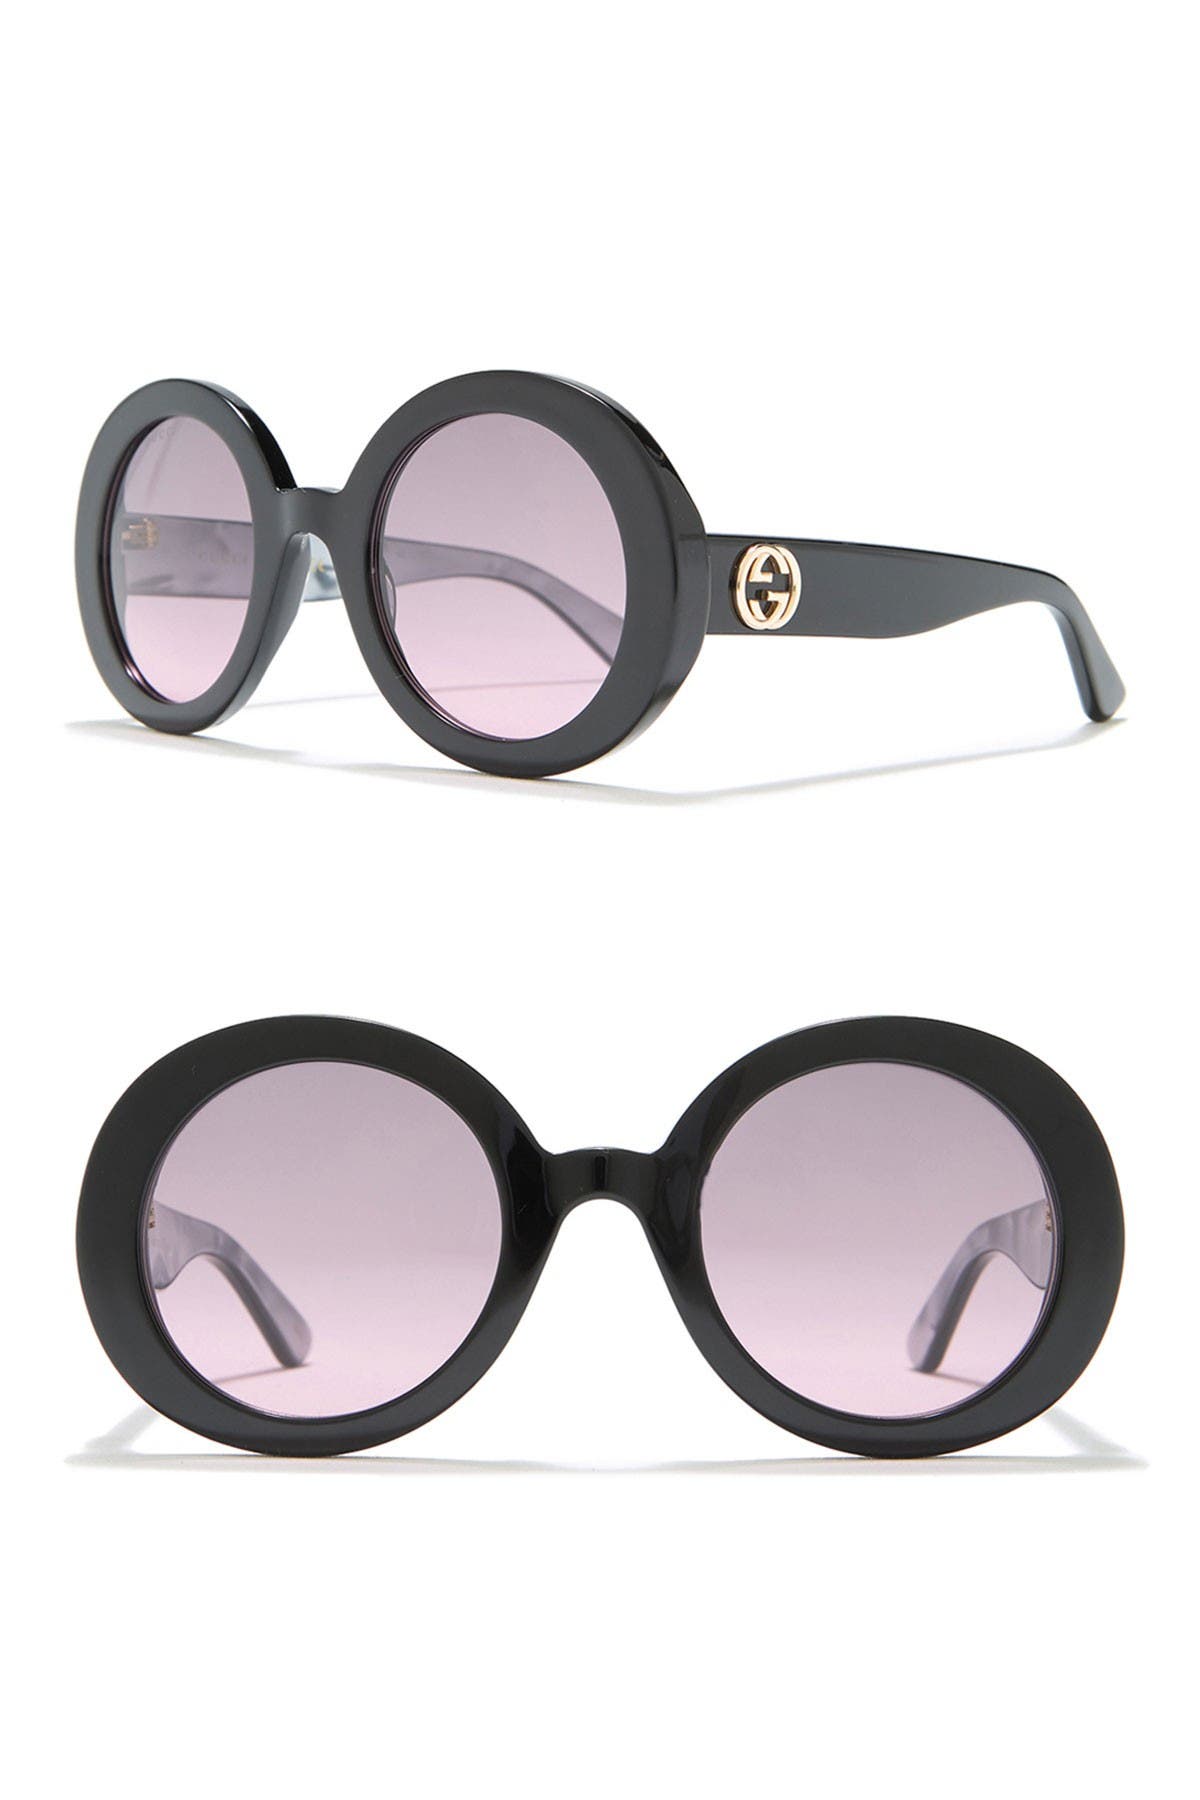 Gucci 52mm Modified Round Sunglasses Nordstrom Rack